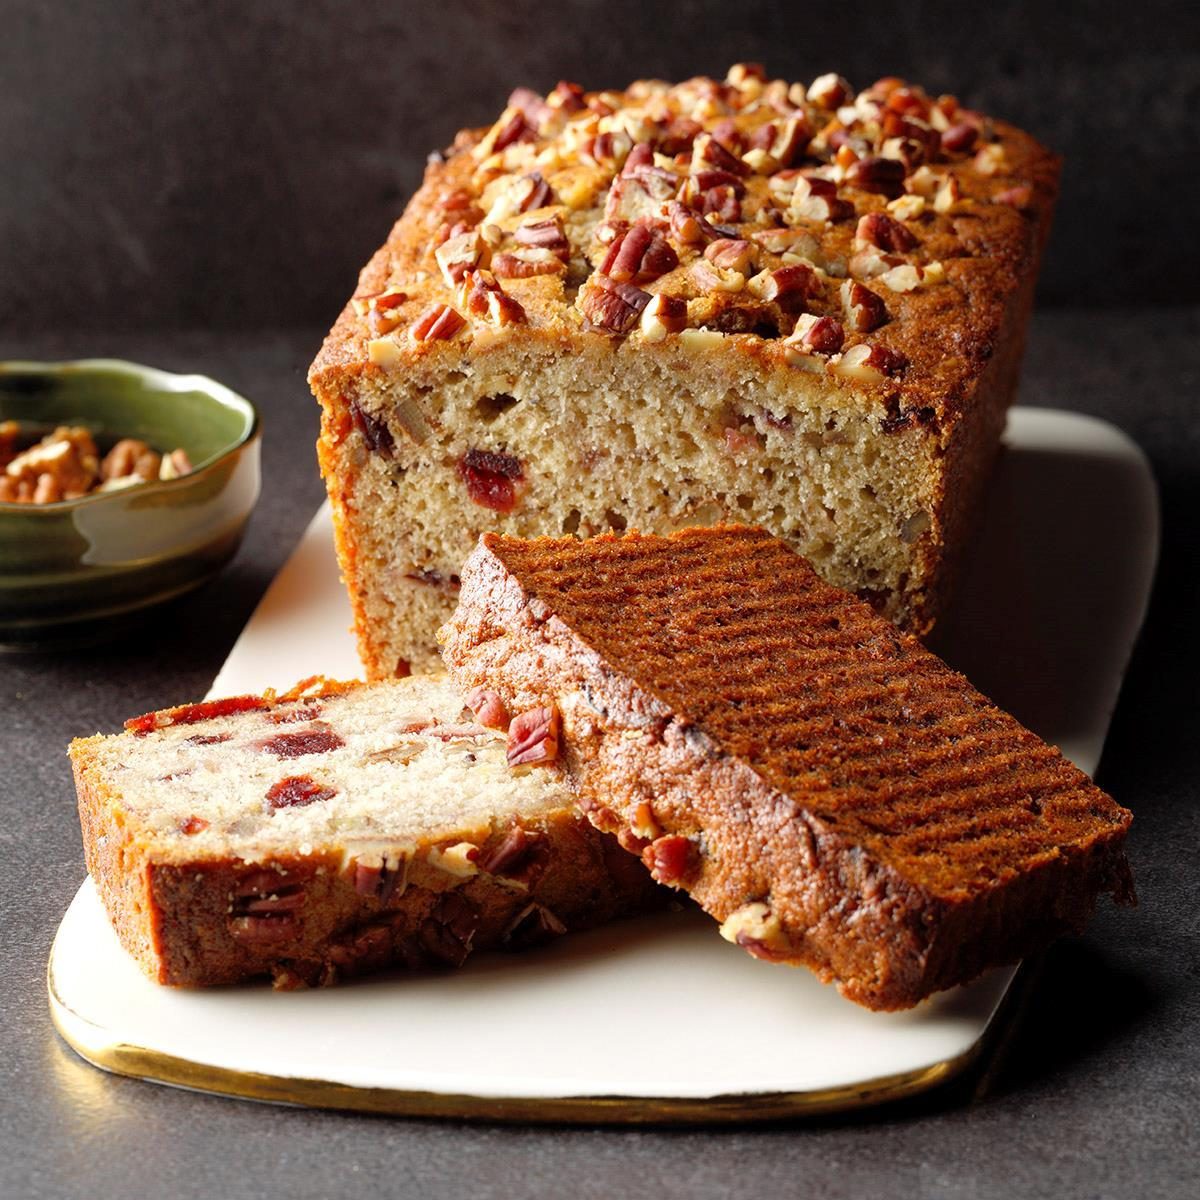 Must-Know Baking Tips for Quick Breads, Yeast Breads, and More